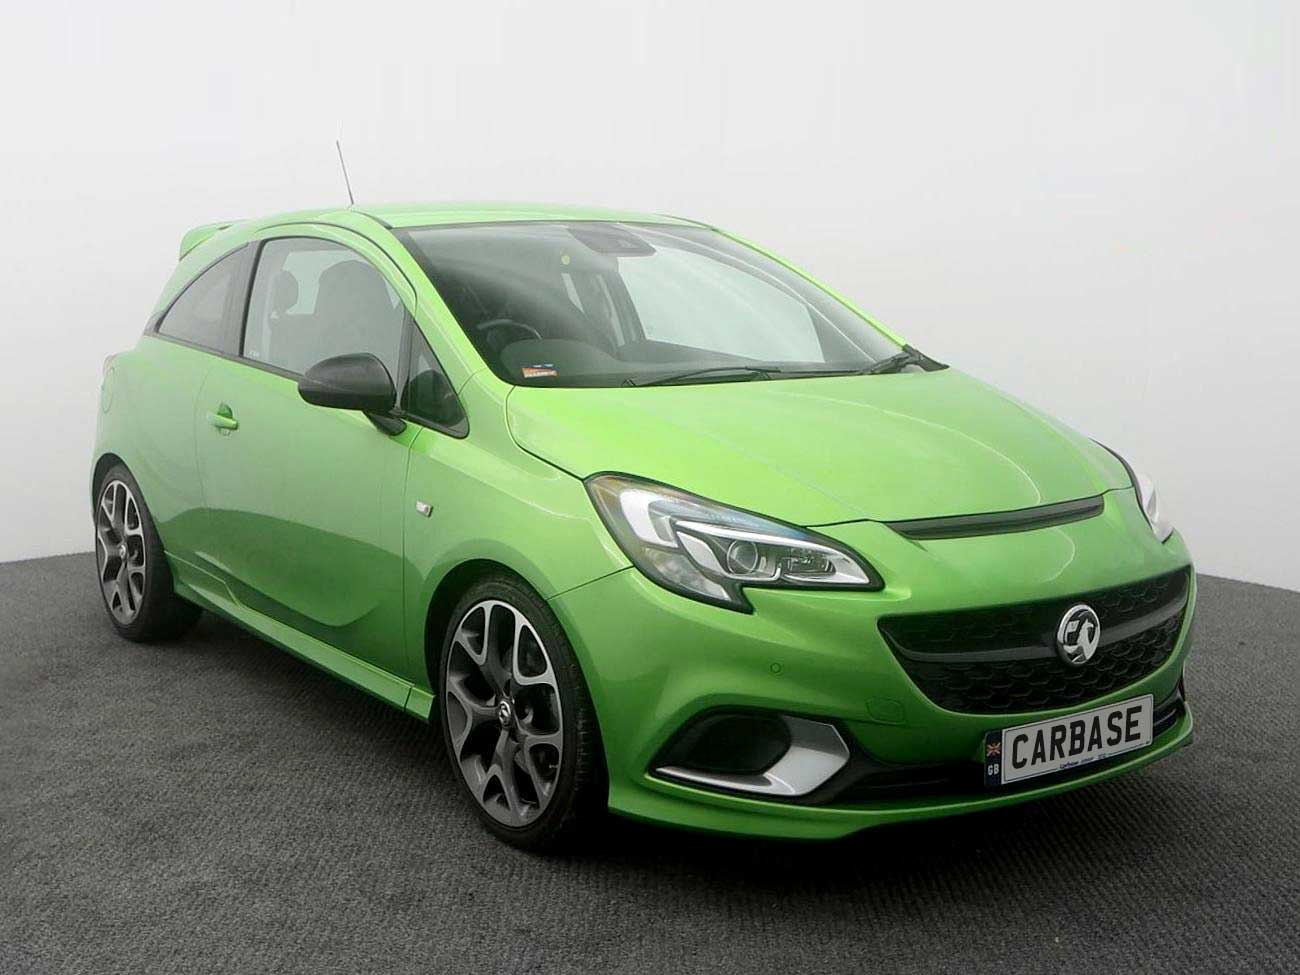 Vauxhall Corsa front view in showroom